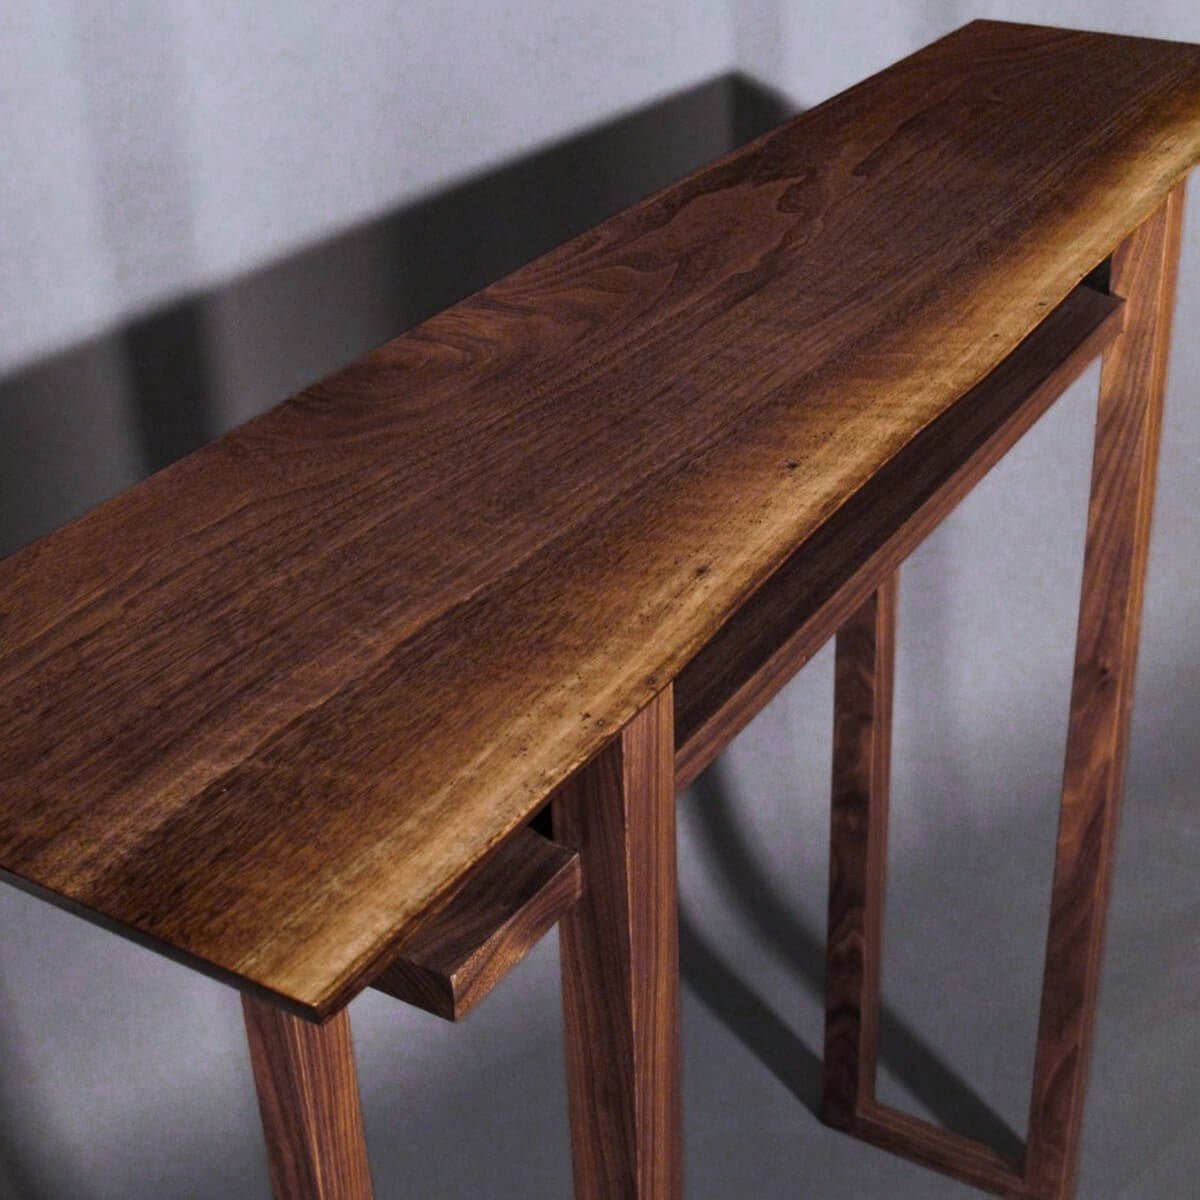 walnut hall console table with live edge table top by Mokuzai Furniture